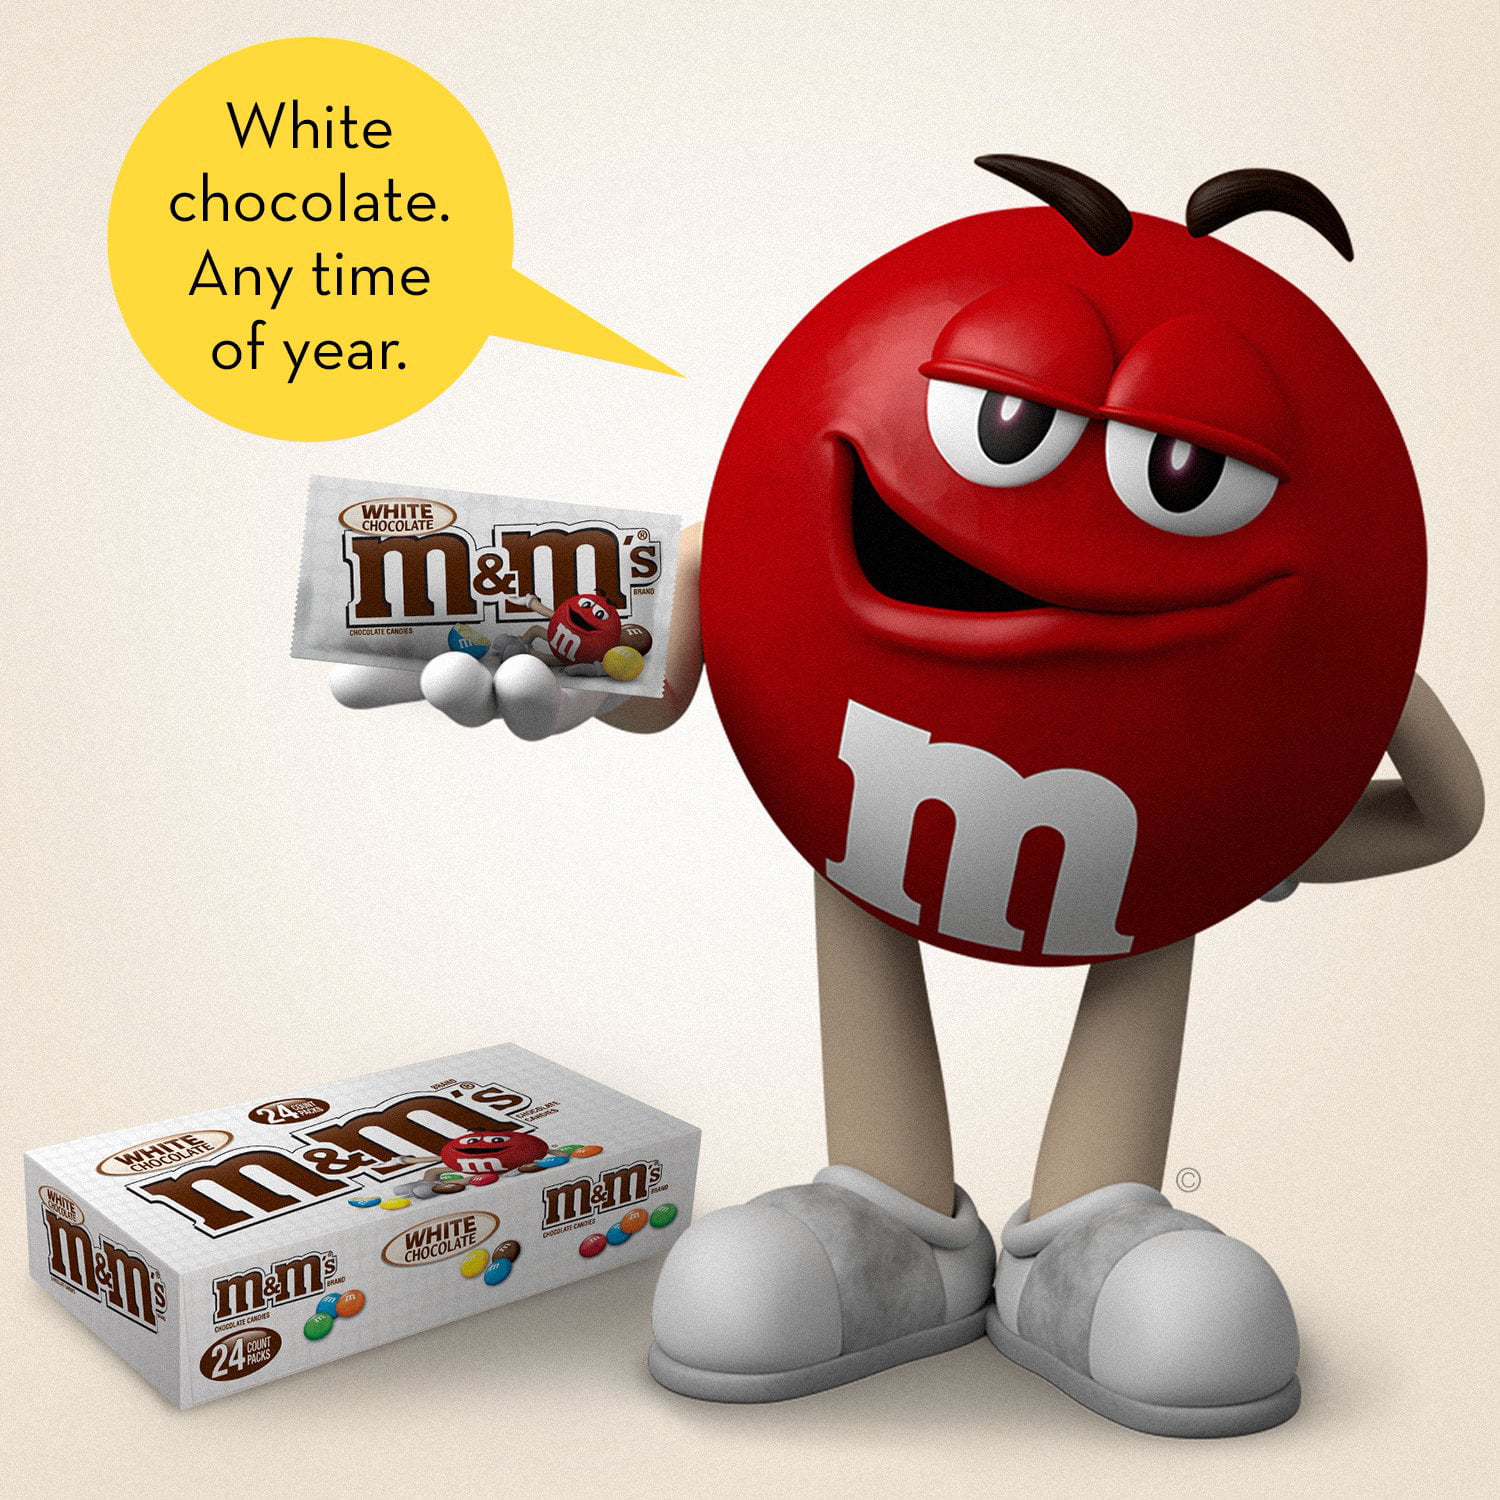 M&M'S White Chocolate Singles Size Candy, 1.41 Oz. Pouch, 24 Ct